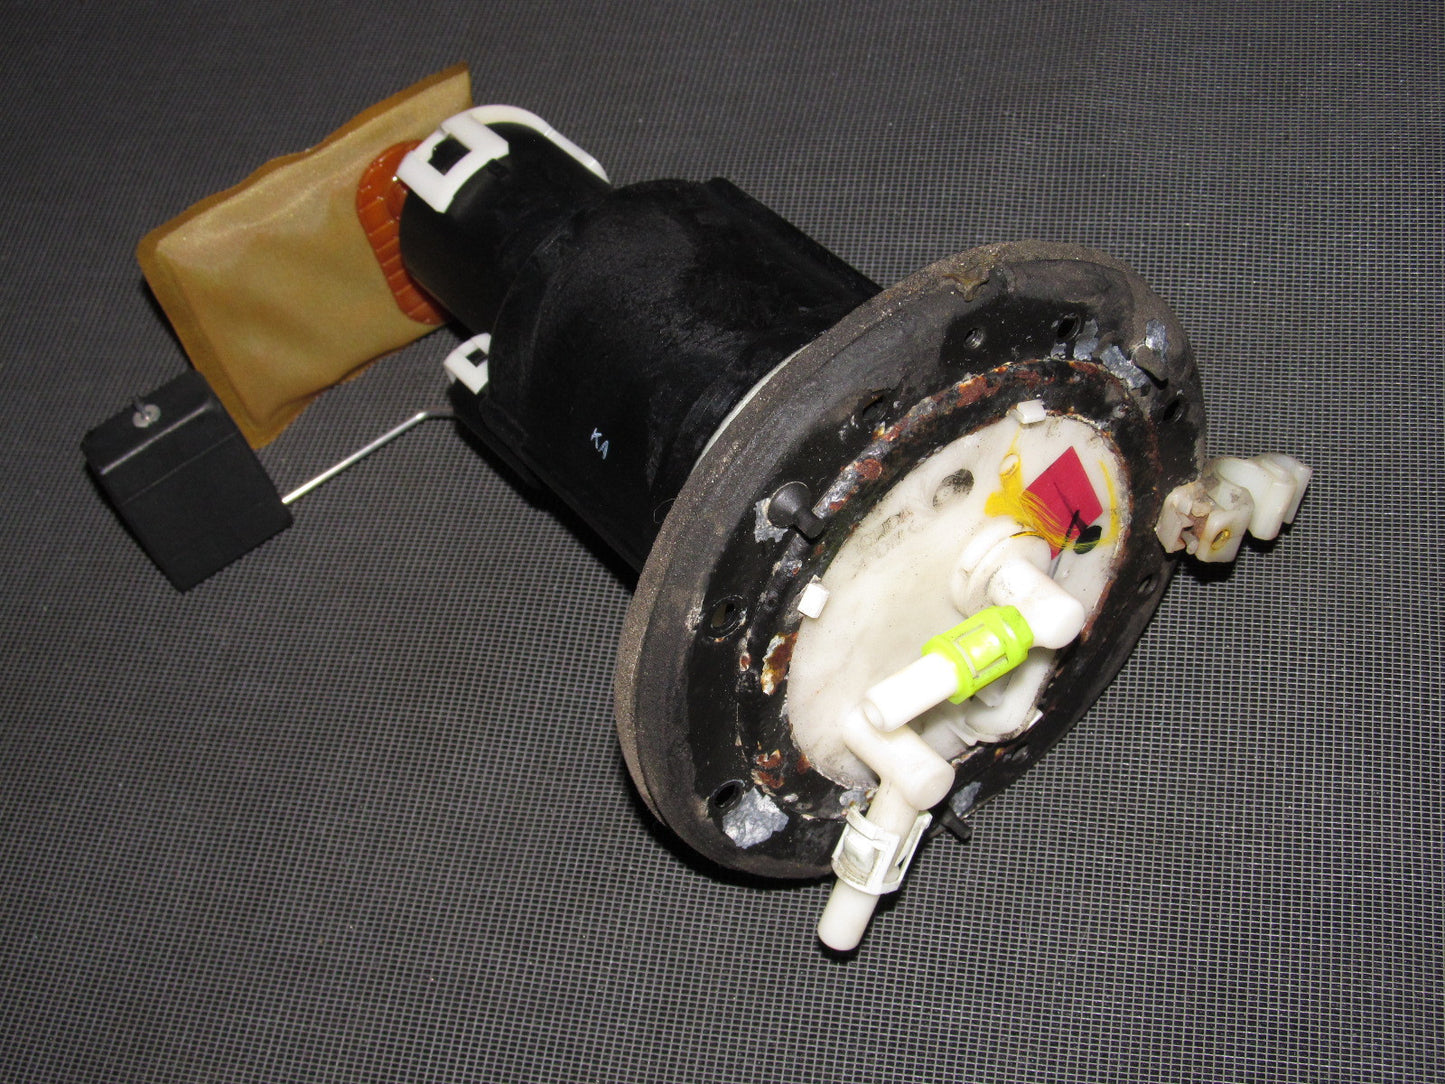 01 02 03 Acura CL Type-S J32A2 Fuel Pump And Sending Unit